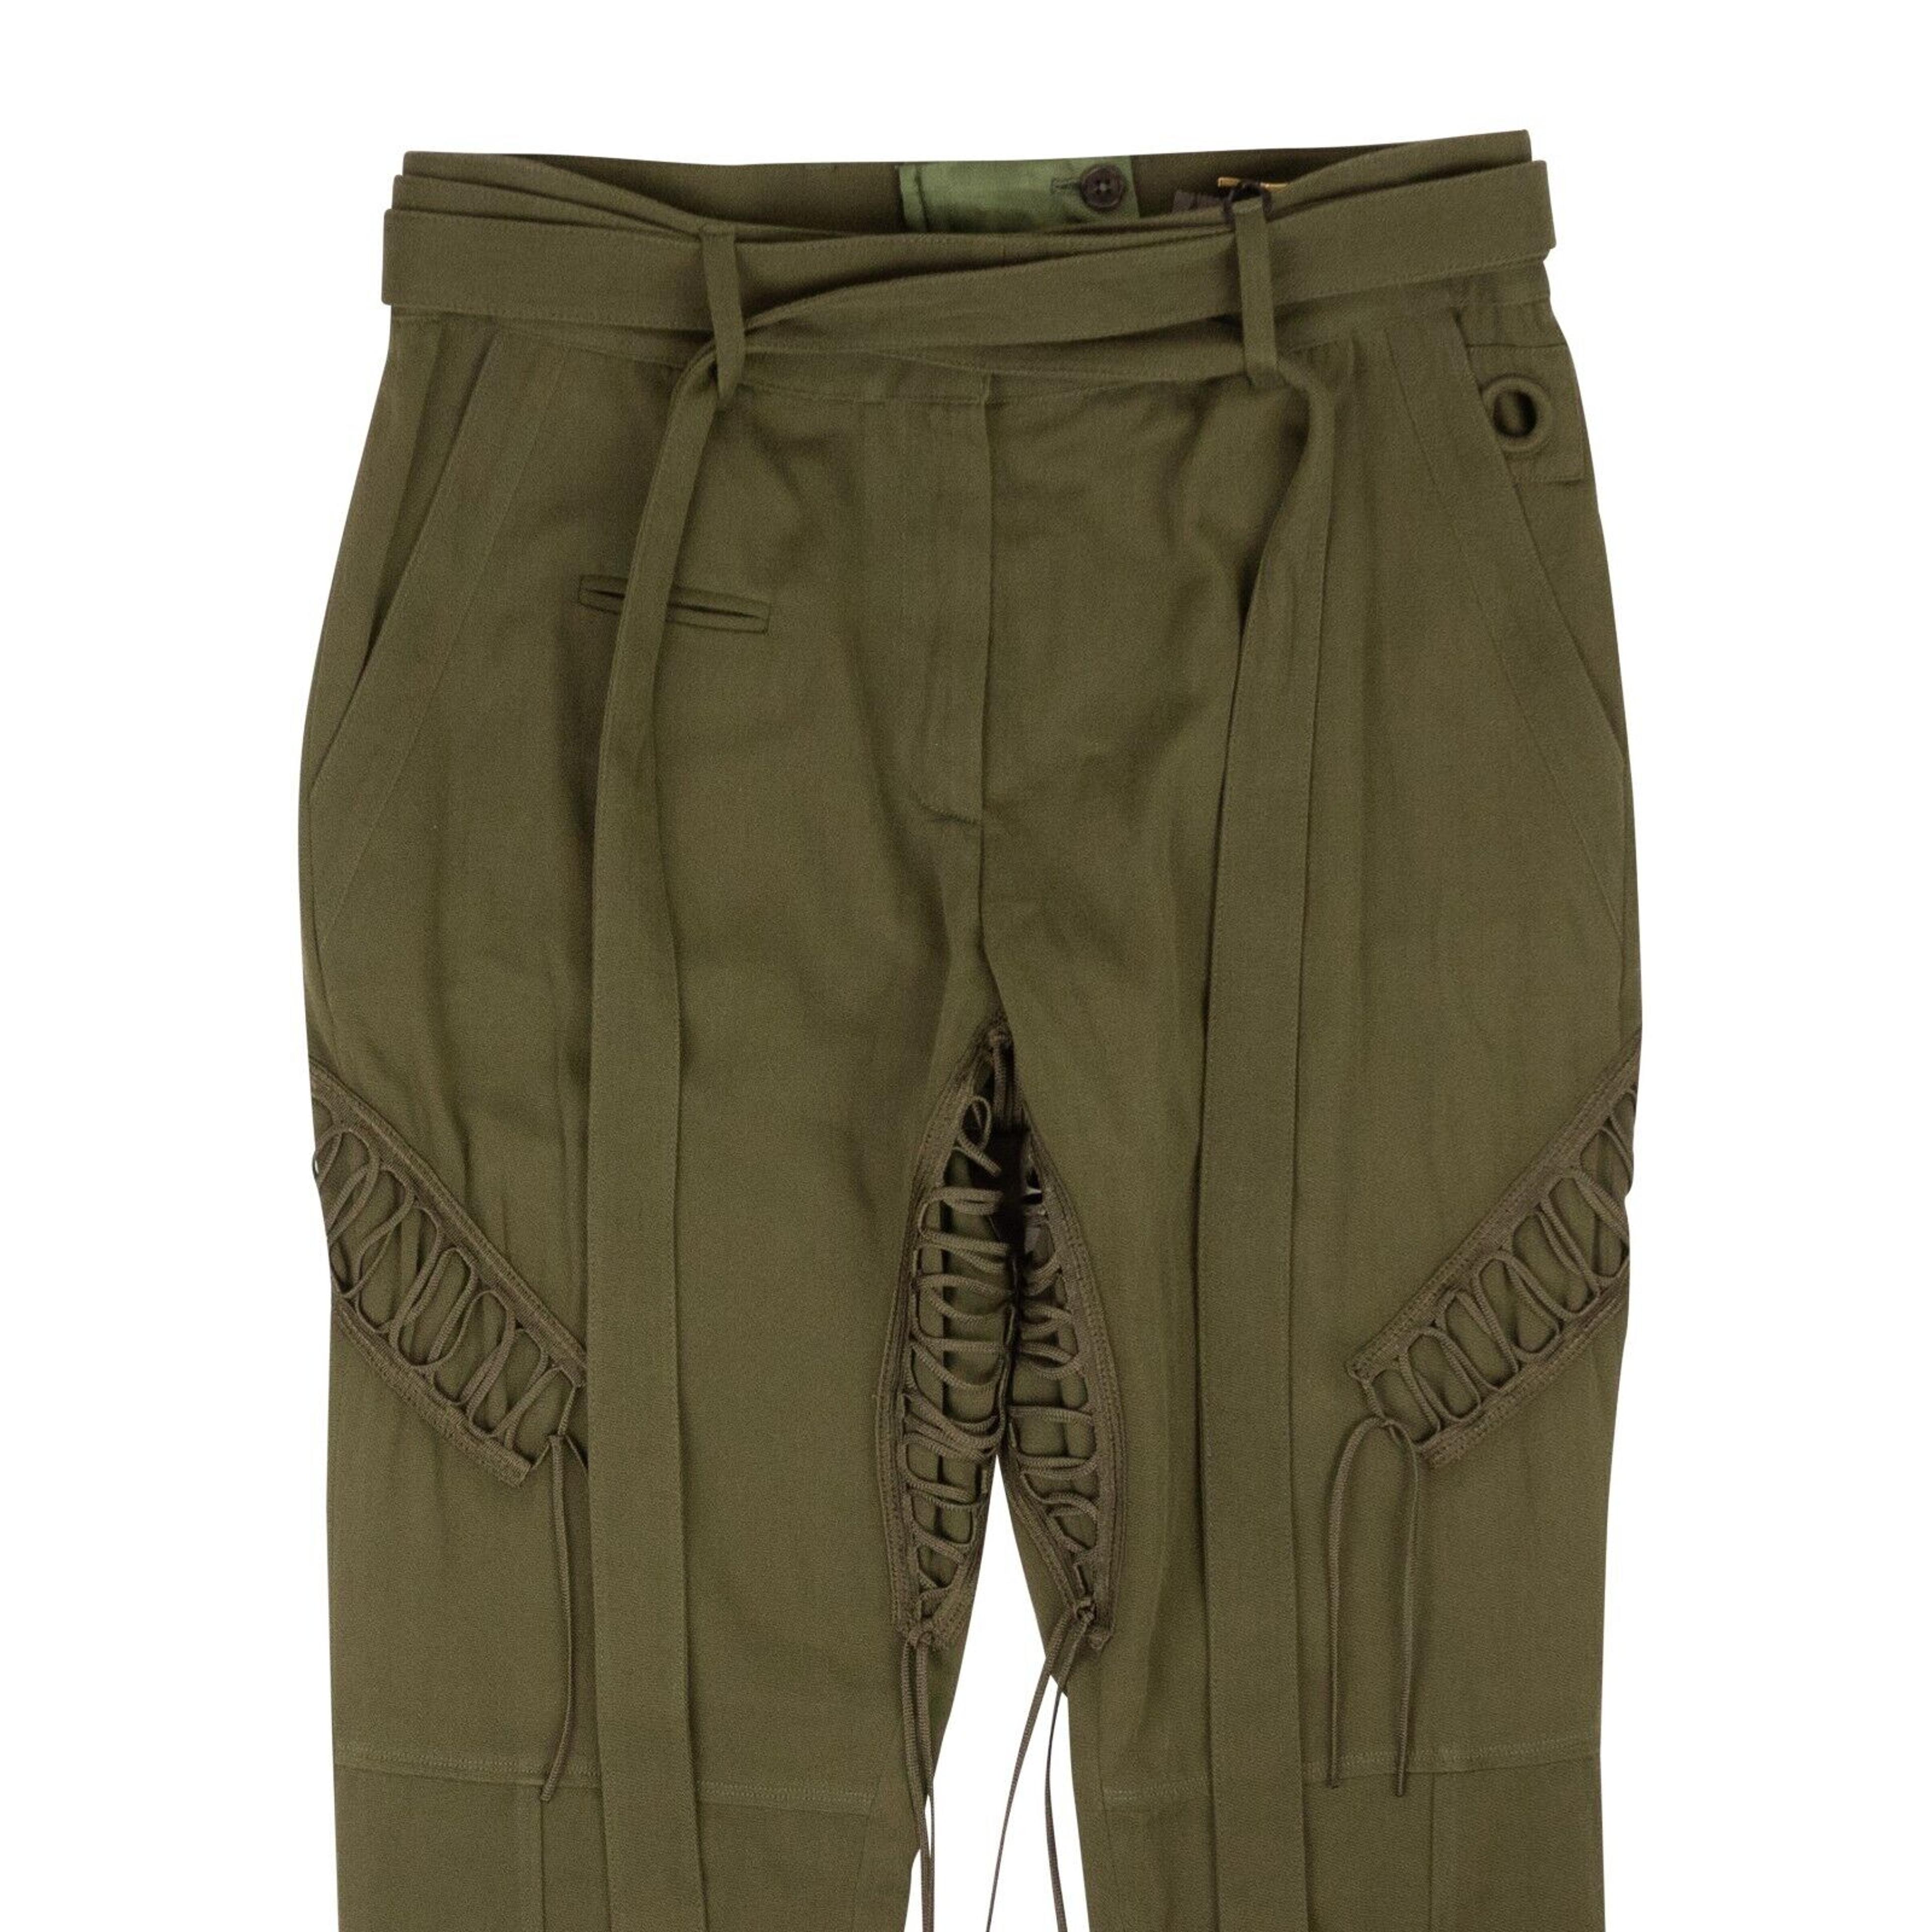 Alternate View 2 of Women's Green Lace-Up Military Pants